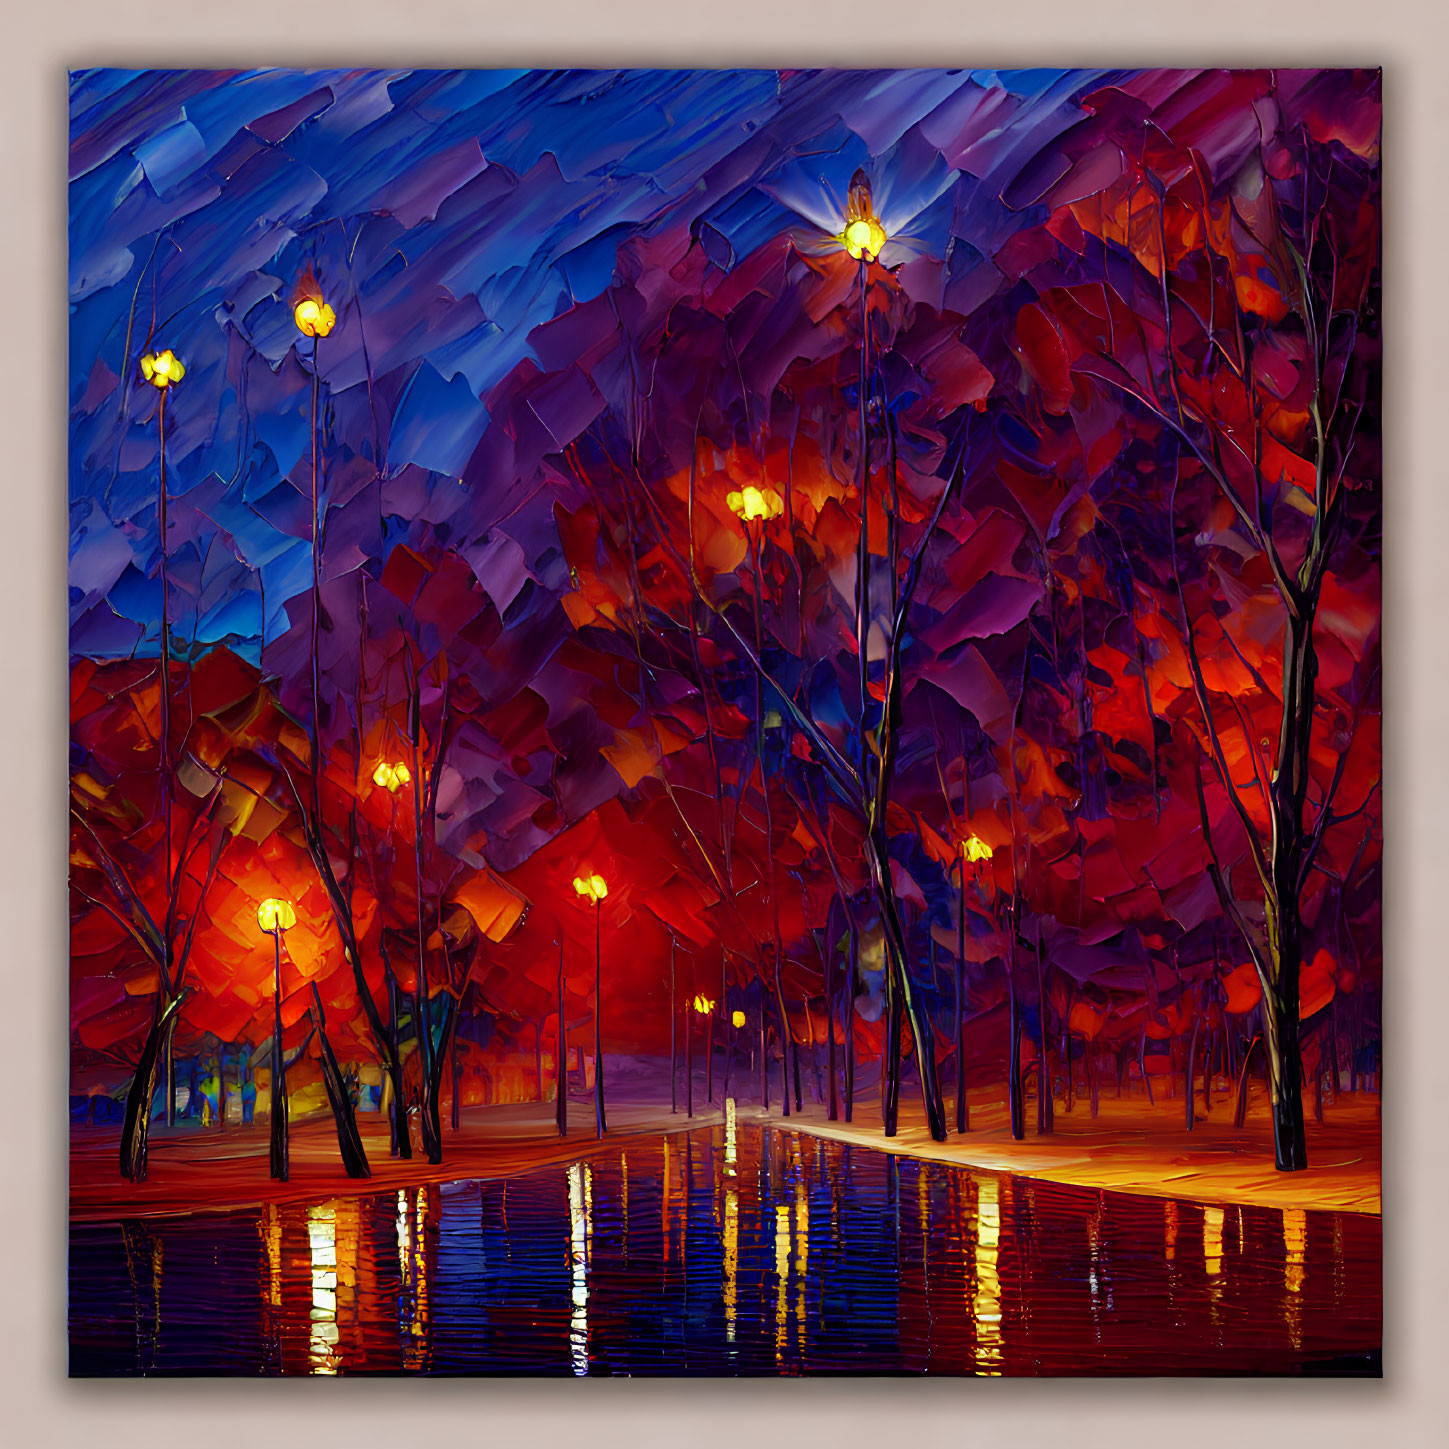 Colorful Night Park Scene with Trees and Lampposts in Vibrant Painting